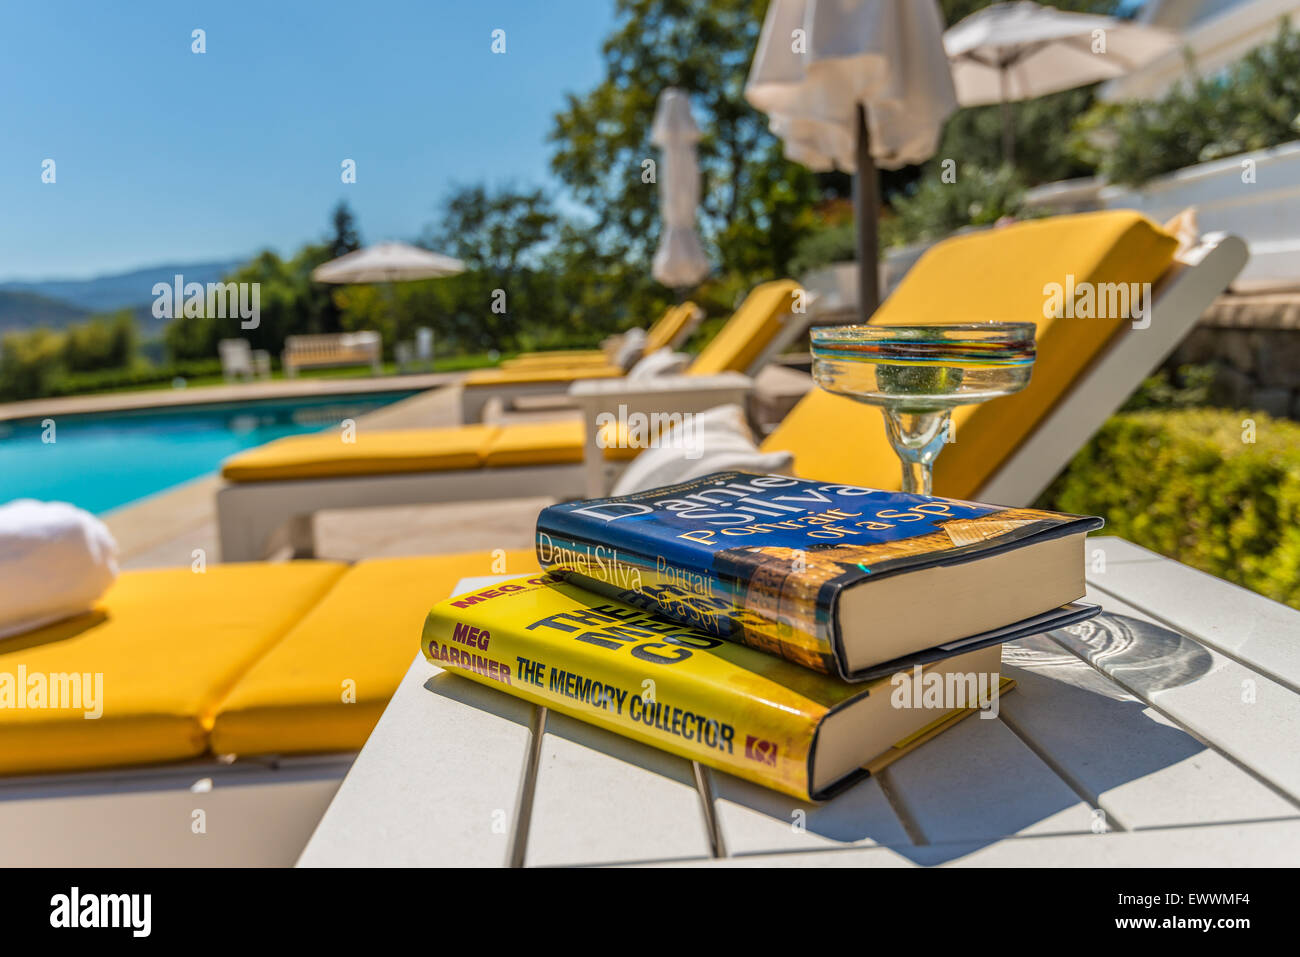 Moderne helle gelbe Chaise Liegestühle am Pool Stockfoto